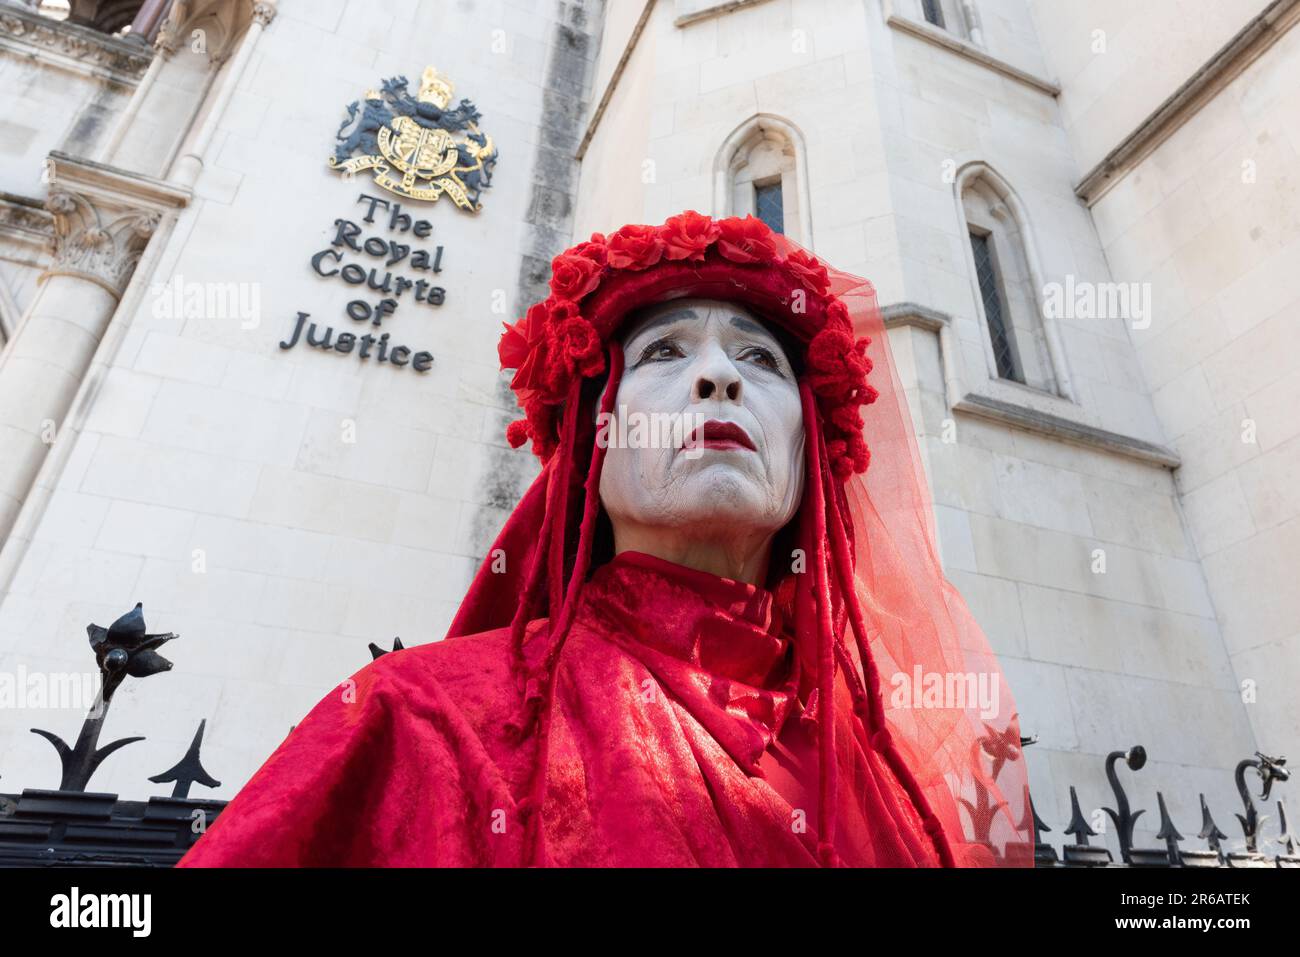 London, UK. 8 June, 2023. The Red Rebel Brigade mime troupe join opponents of a proposed scheme to drill for gas in Surrey rallying outside the Royal Courts of Justice at the start of a judicial review. The original application to search for fossil fuels in 2020 was rejected by Surrey County Council, but later approved by minister Michael Gove. Waverley Borough Council challenged this decision and were granted a judicial review. Arguments raised include greenhouse gas emissions and the proximity of the site to an Area of Outstanding Natural Beauty (AONB). Credit: Ron Fassbender/Alamy Live News Stock Photo